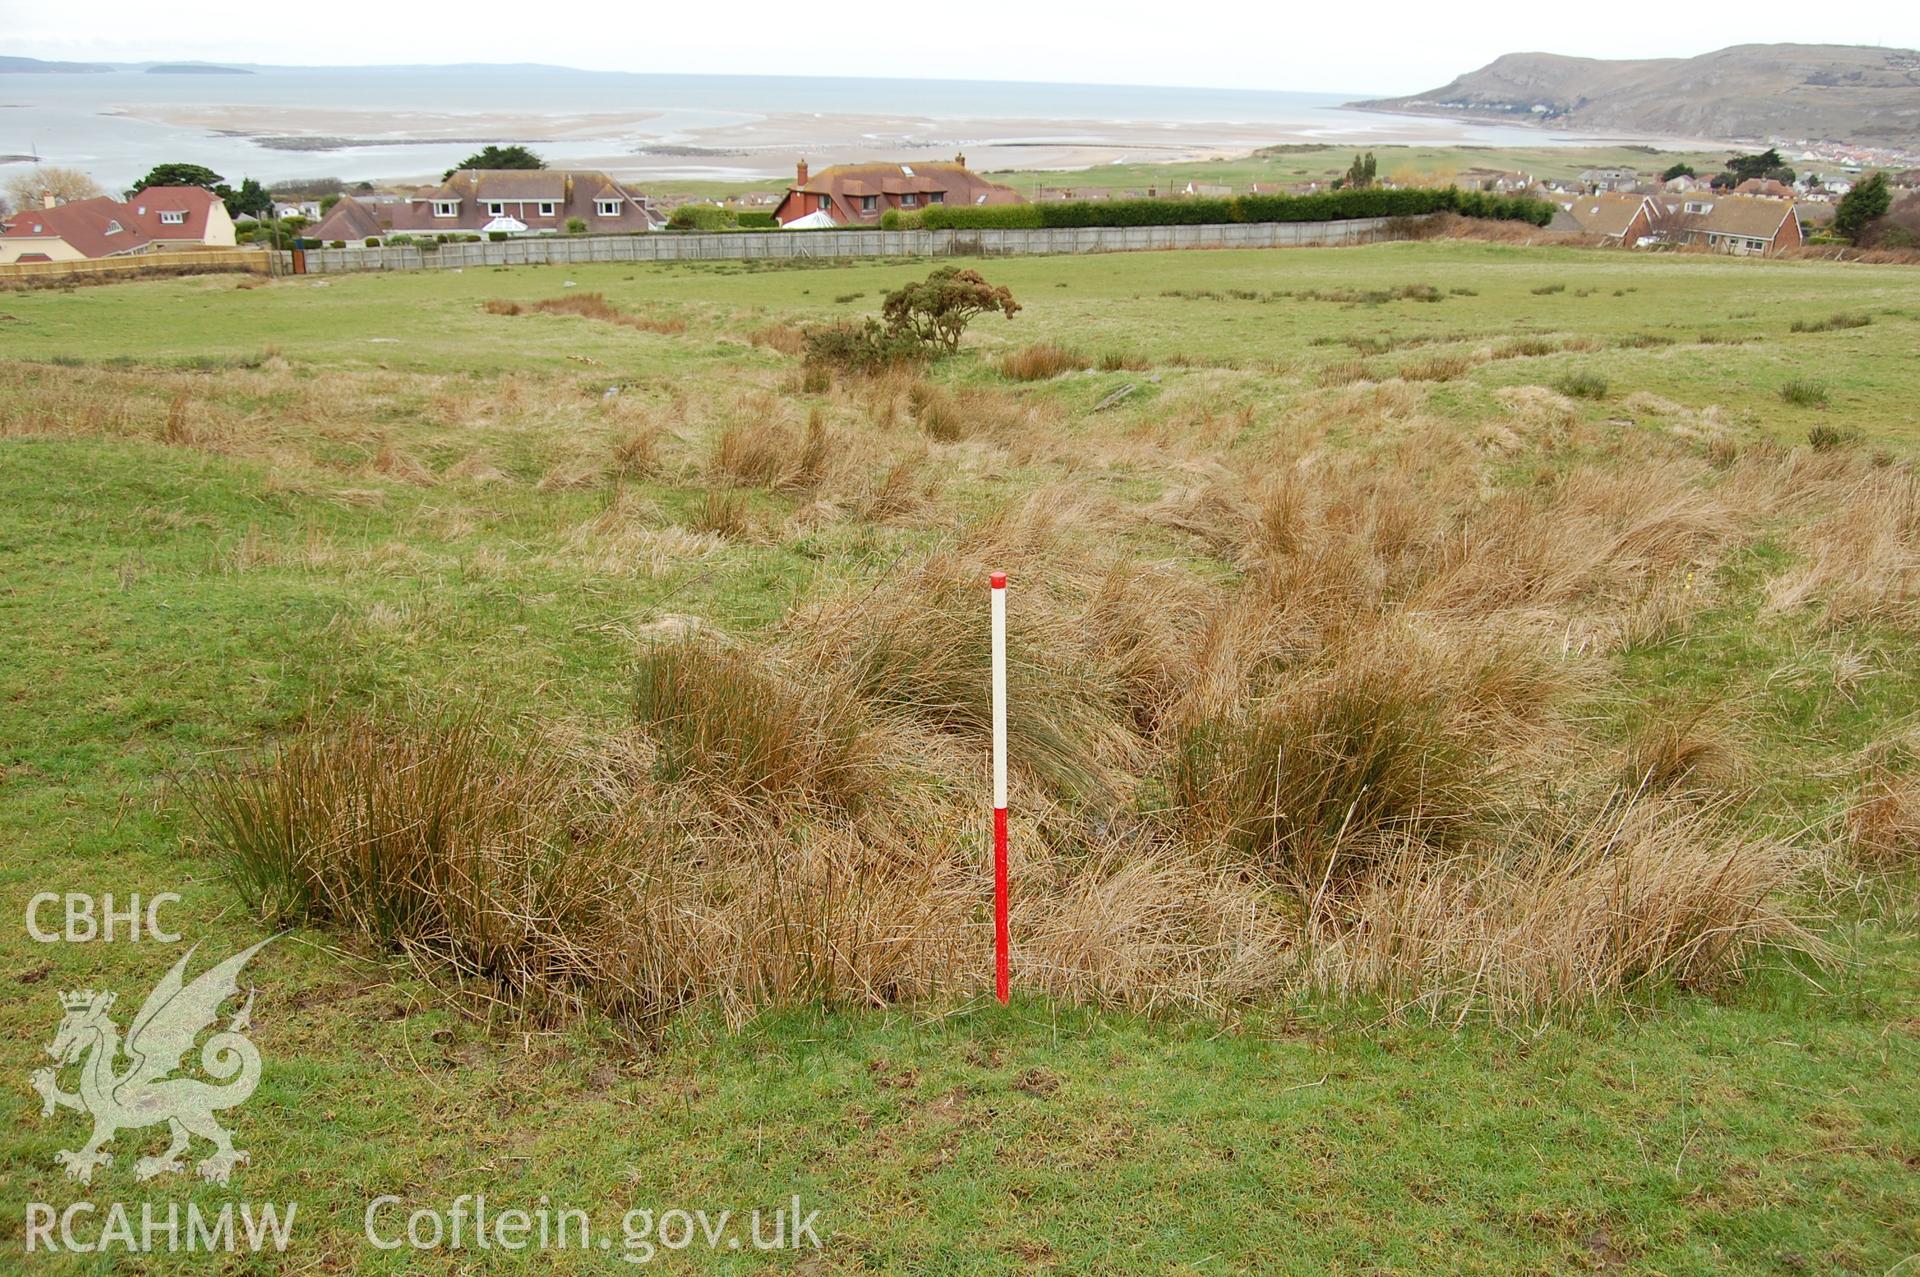 Digital photograph from an archaeological assessment of Deganwy Castle, carried out by Gwynedd Archaeological Trust, 2009. Spring in North field.